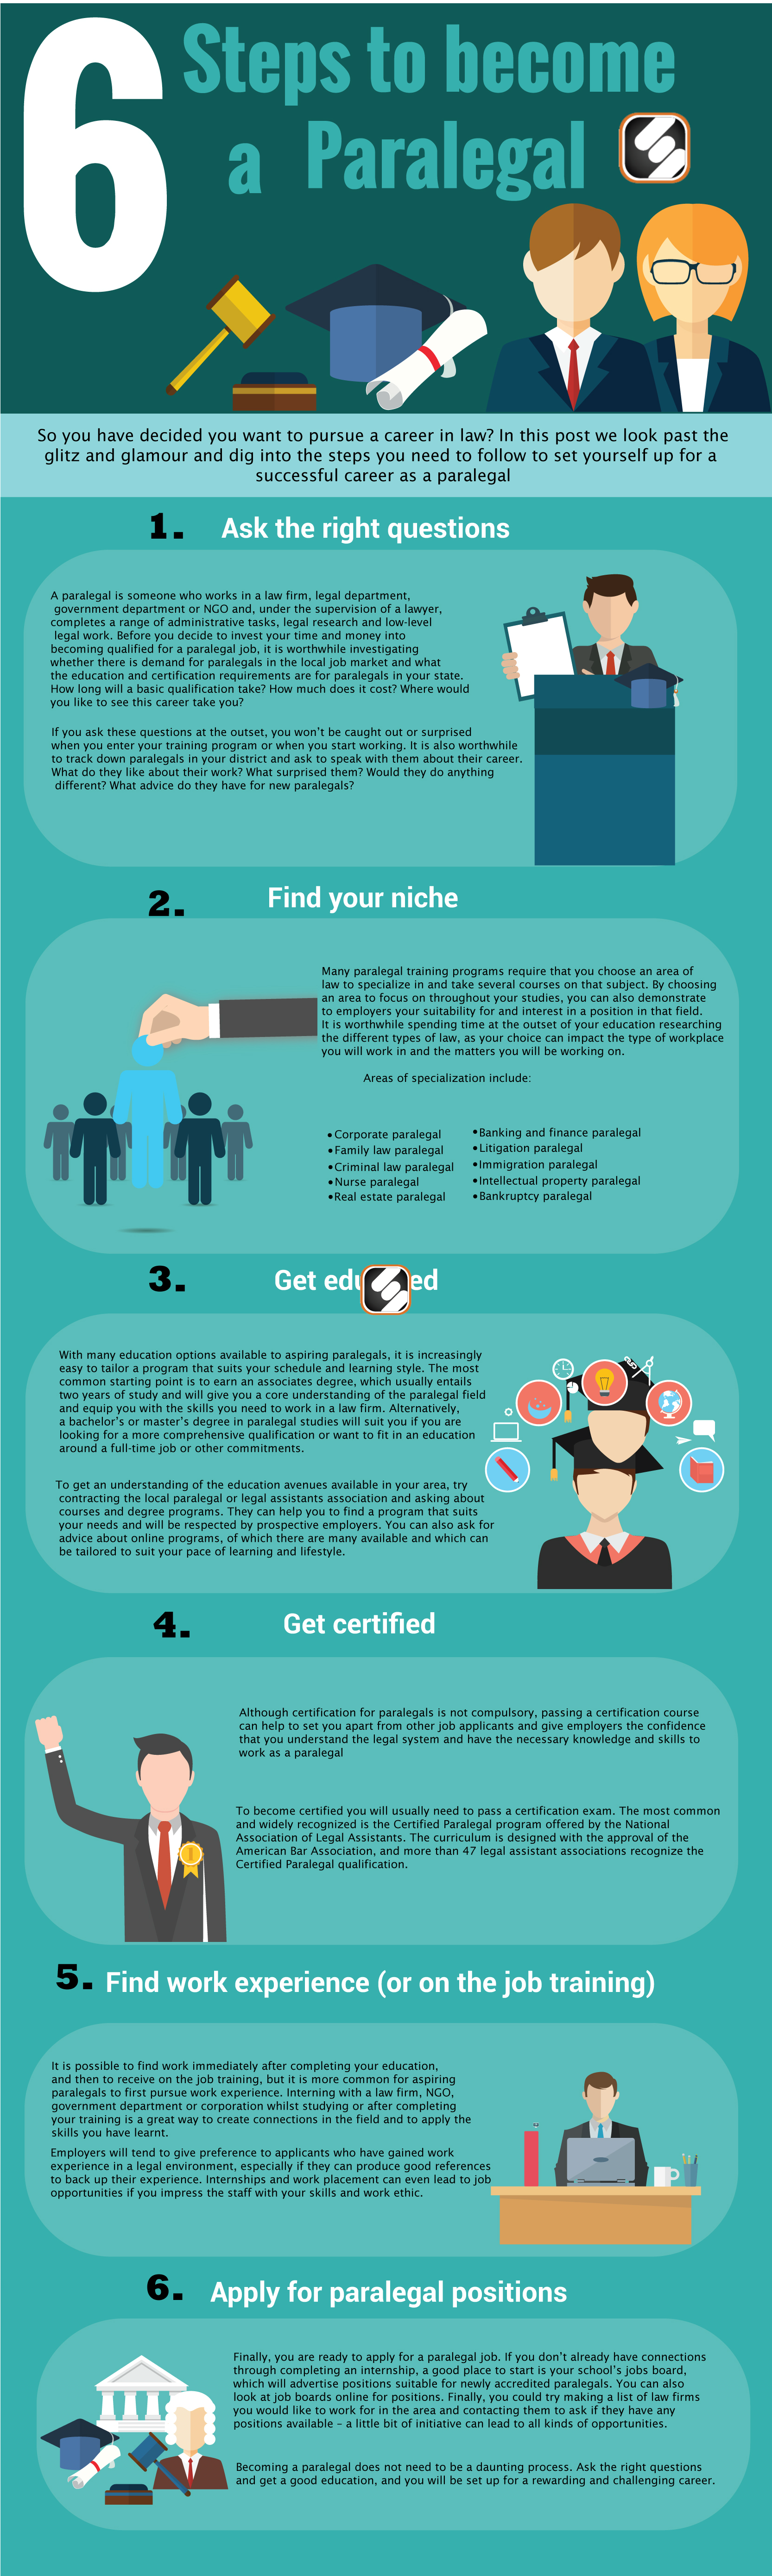 6 Vital Steps To Become A Paralegal